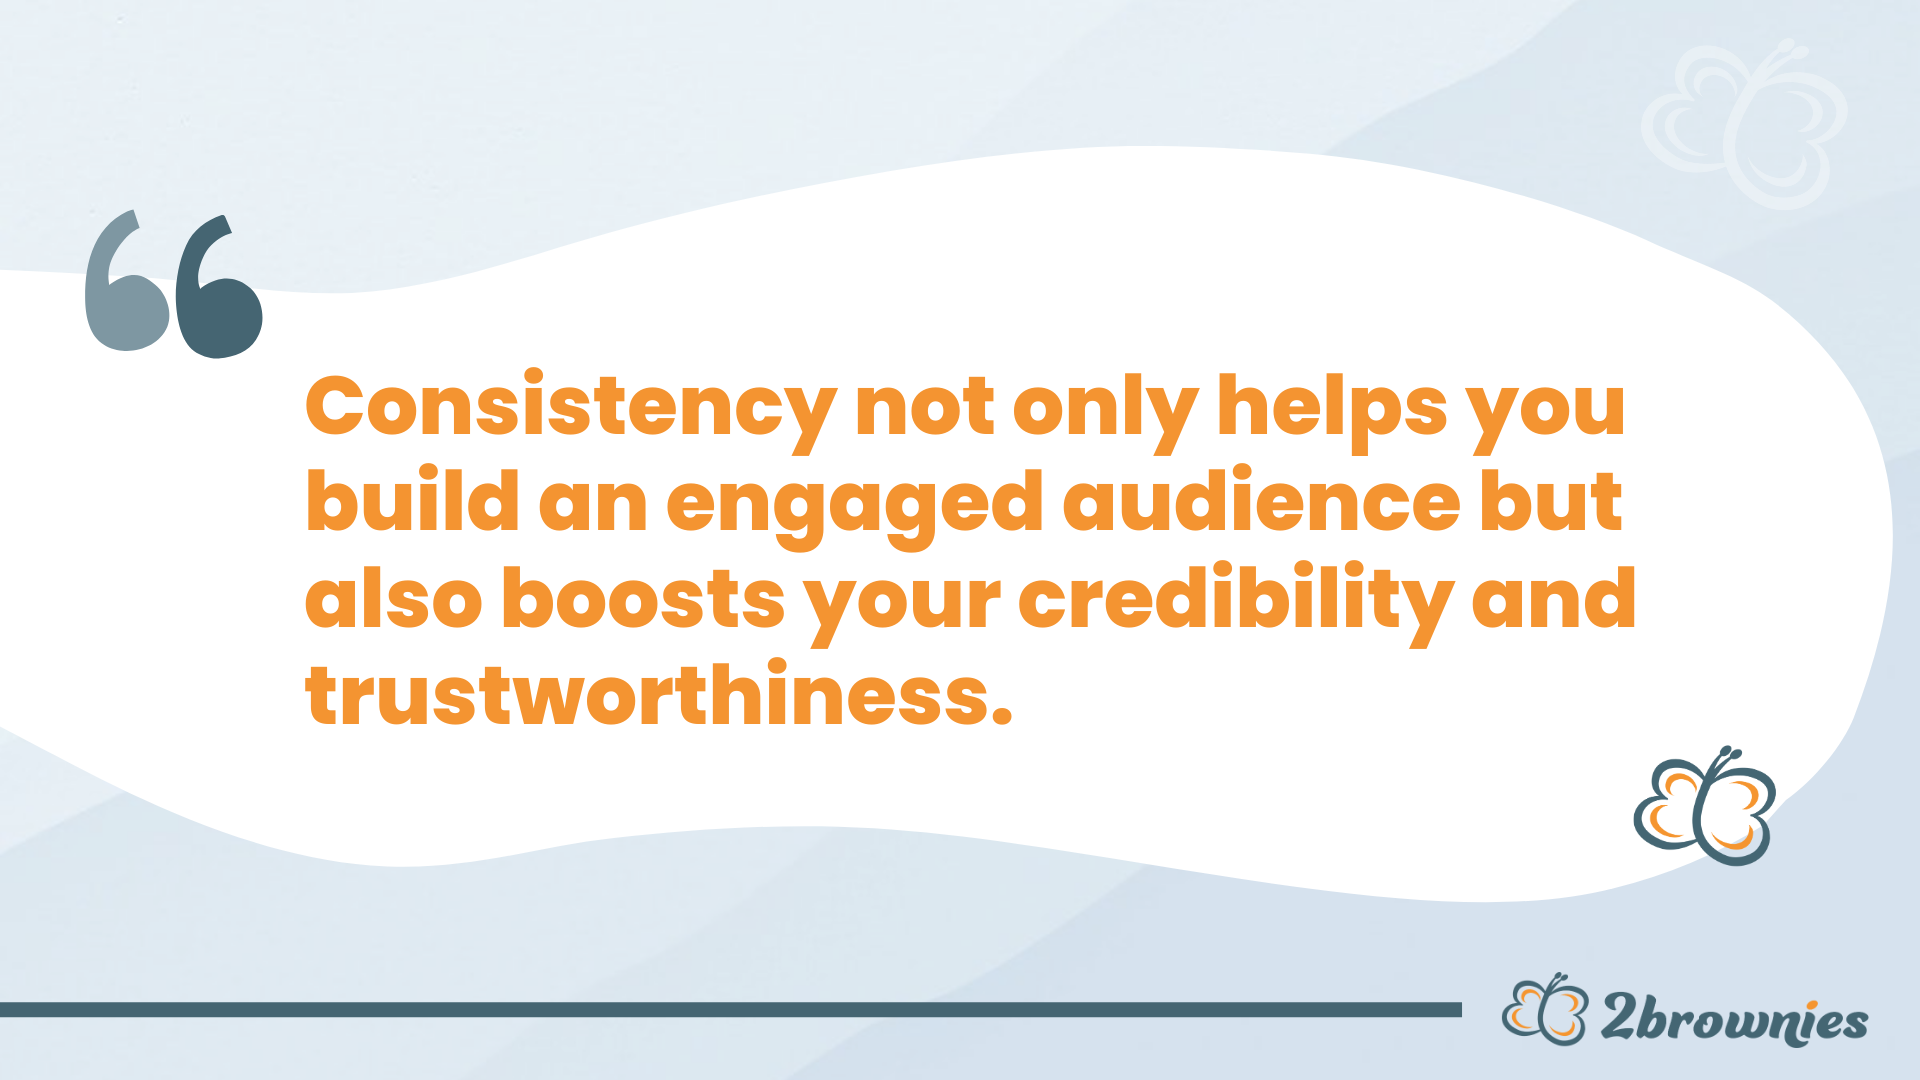 Banner says: Consistency not only helps you build an engaged audience but it boosts your credibility and trustworthiness.